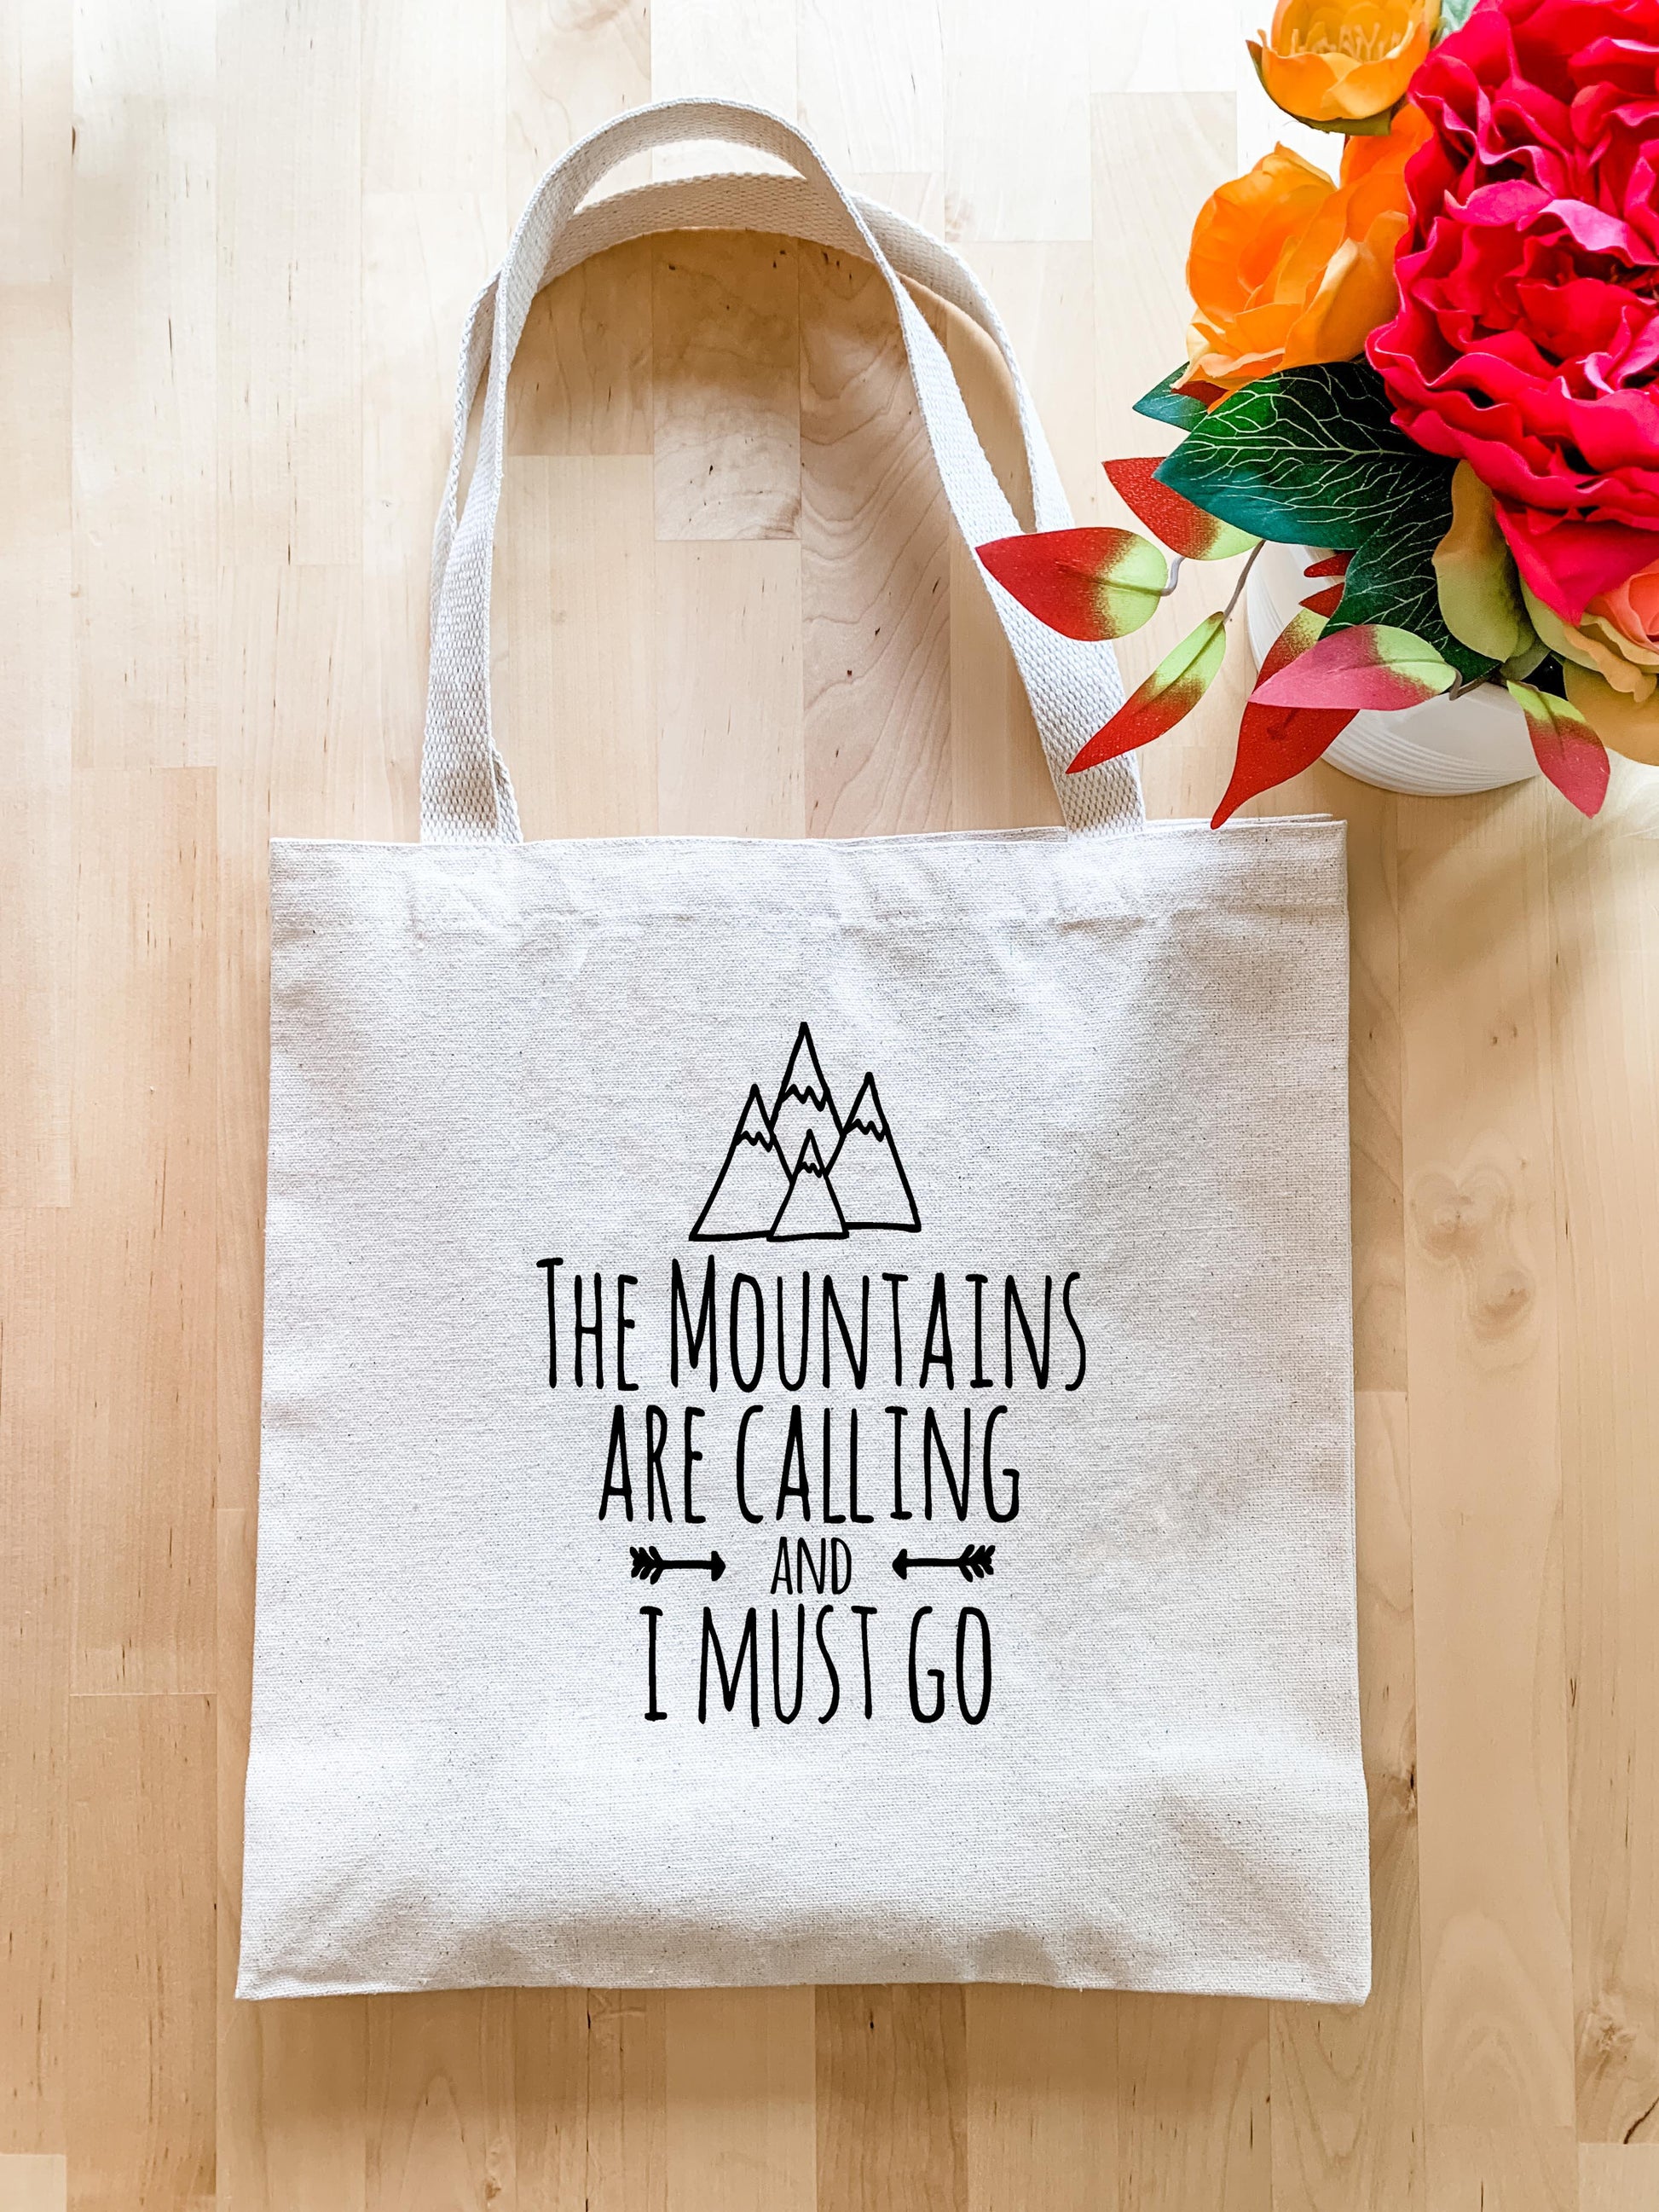 The Mountains are Calling and I Must Go - Tote Bag - MoonlightMakers